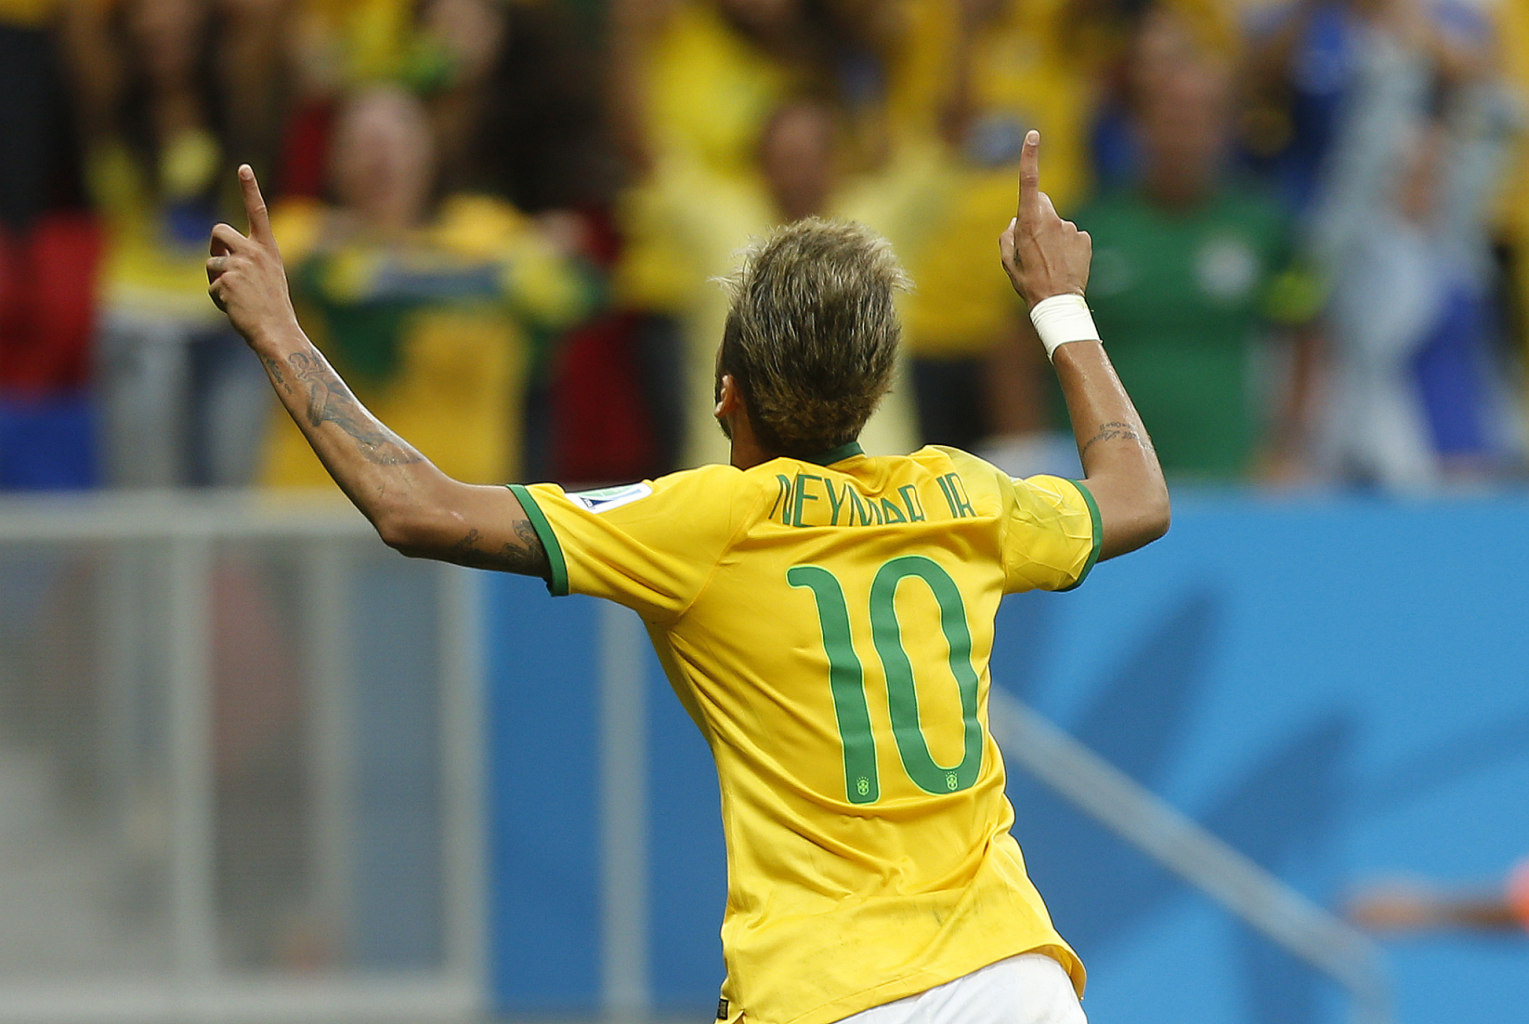 Neymar celebrating a goal in the World Cup